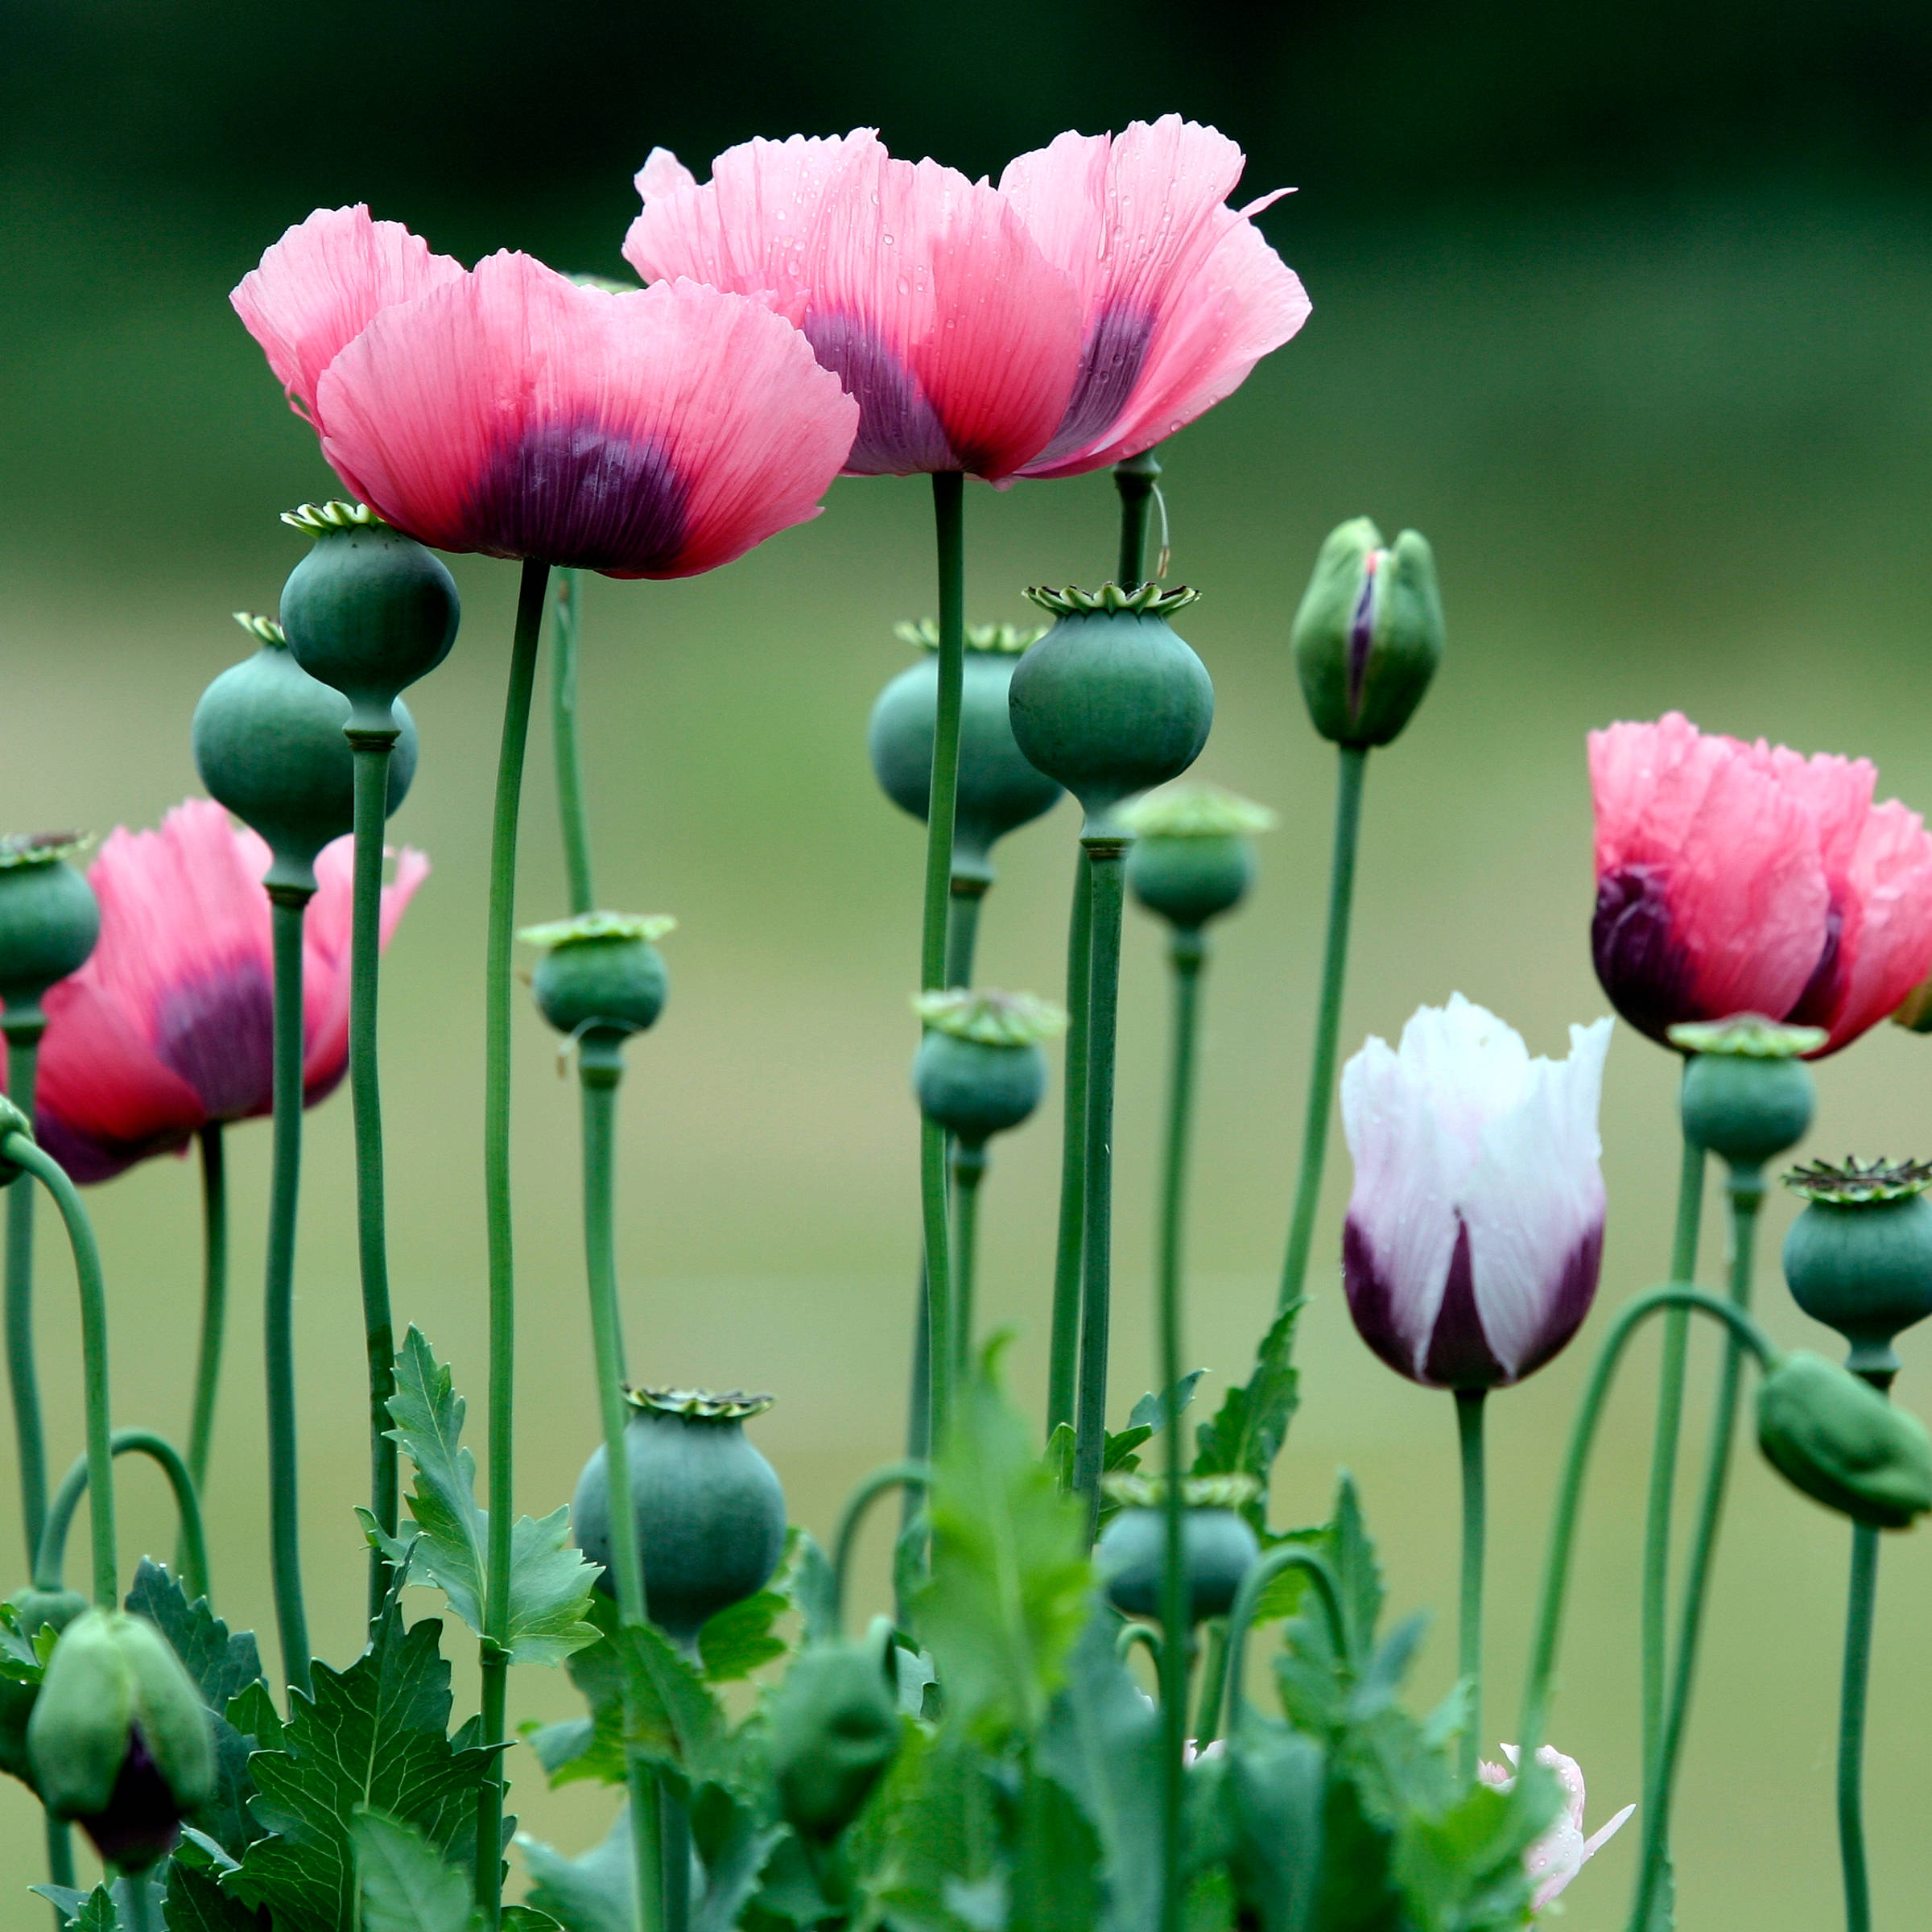 Pink poppy flowers stand amongst green poppy capsules on stalks. Photo: AtWaG / iStock.